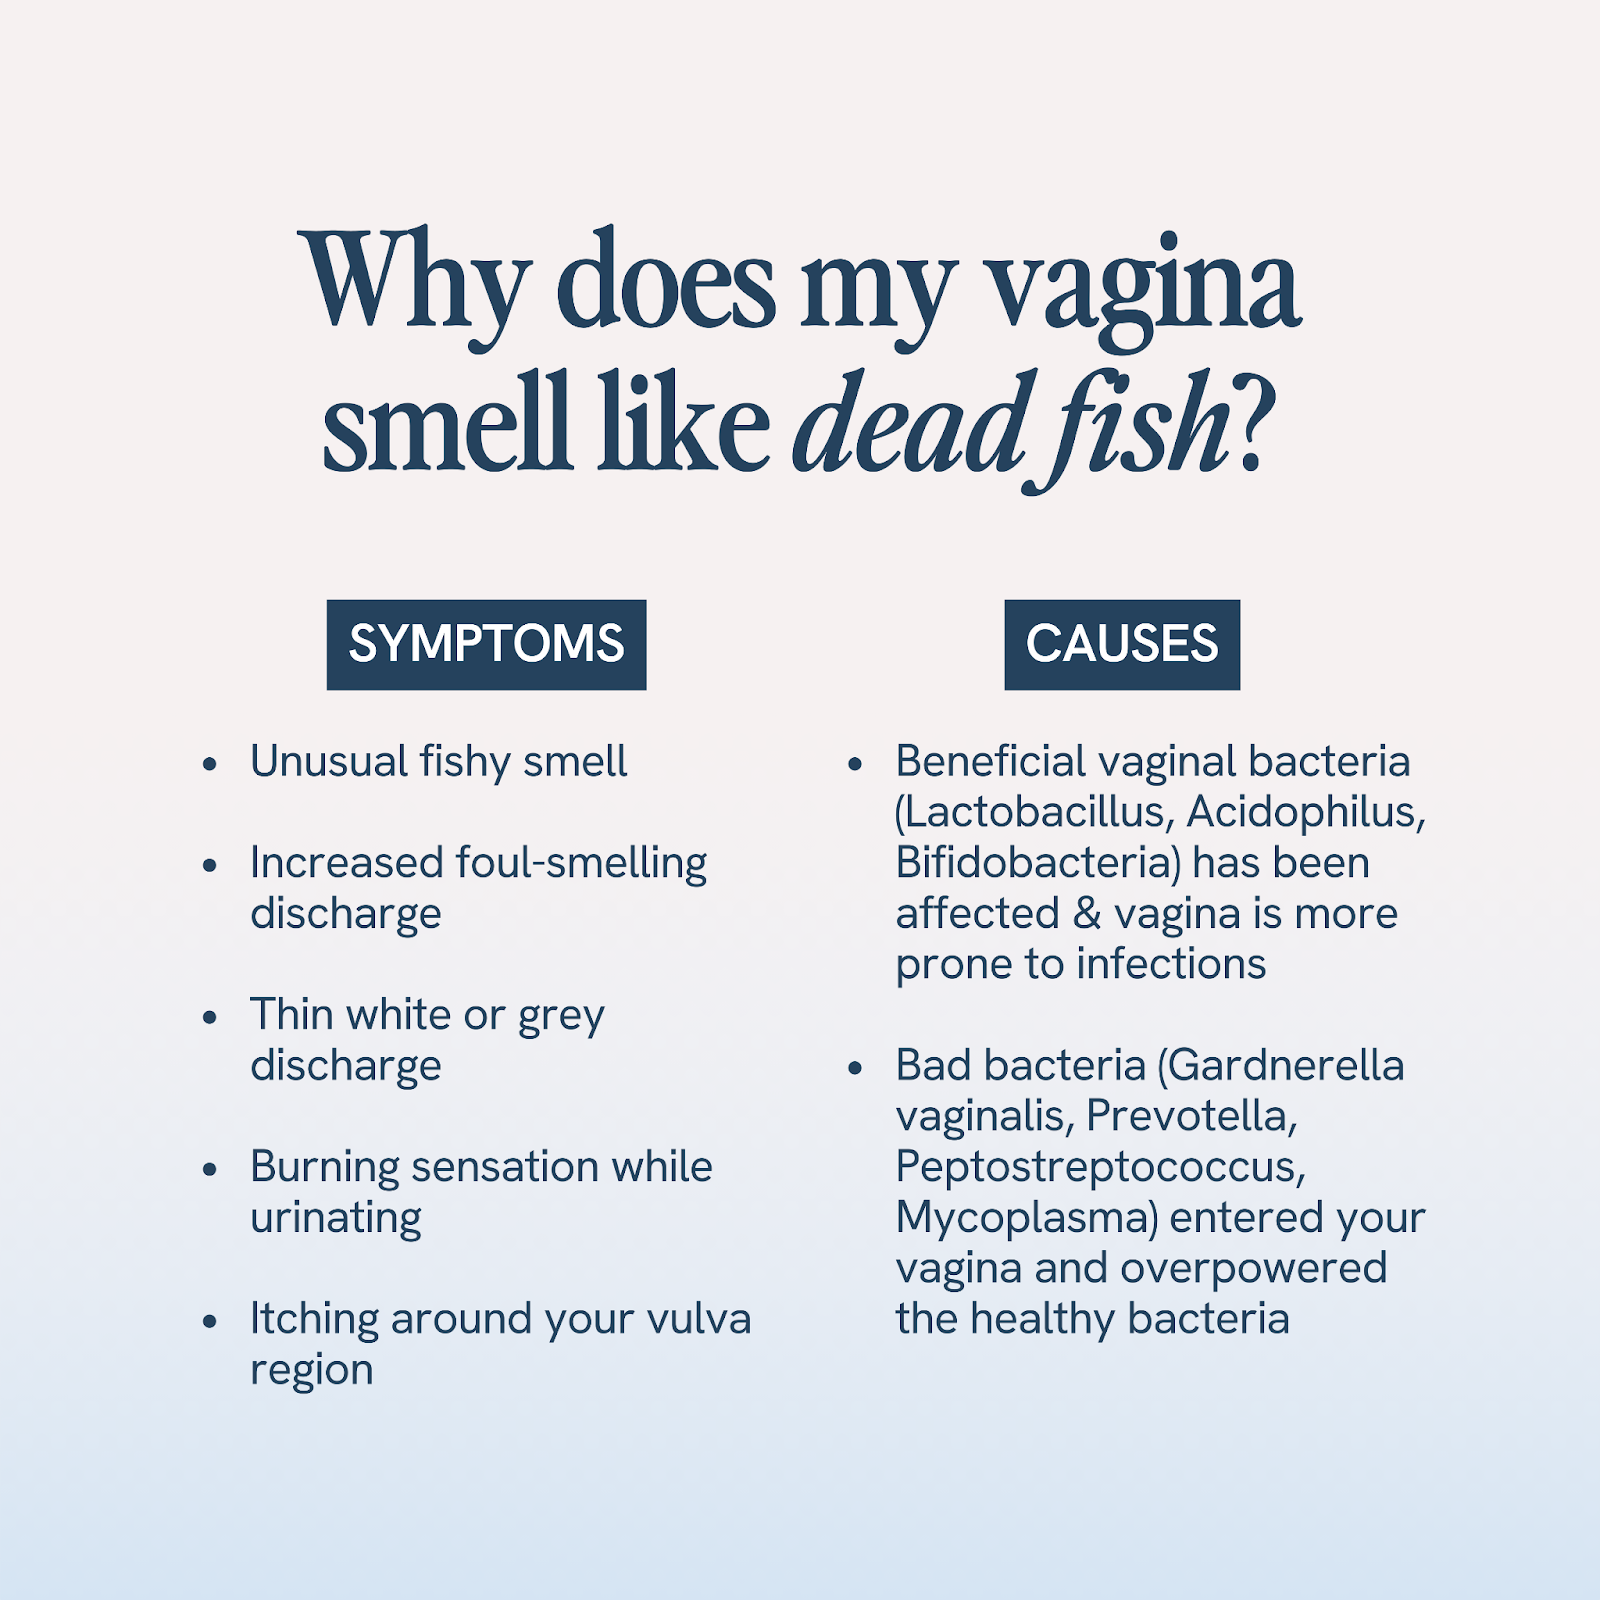 An educational image explaining vaginal odor with a title 'Why does my vagina smell like dead fish?' Highlights symptoms like fishy smell and unusual discharge, and causes like imbalance of beneficial bacteria and harmful bacteria overgrowth. The text is succinct, in two columns for clarity